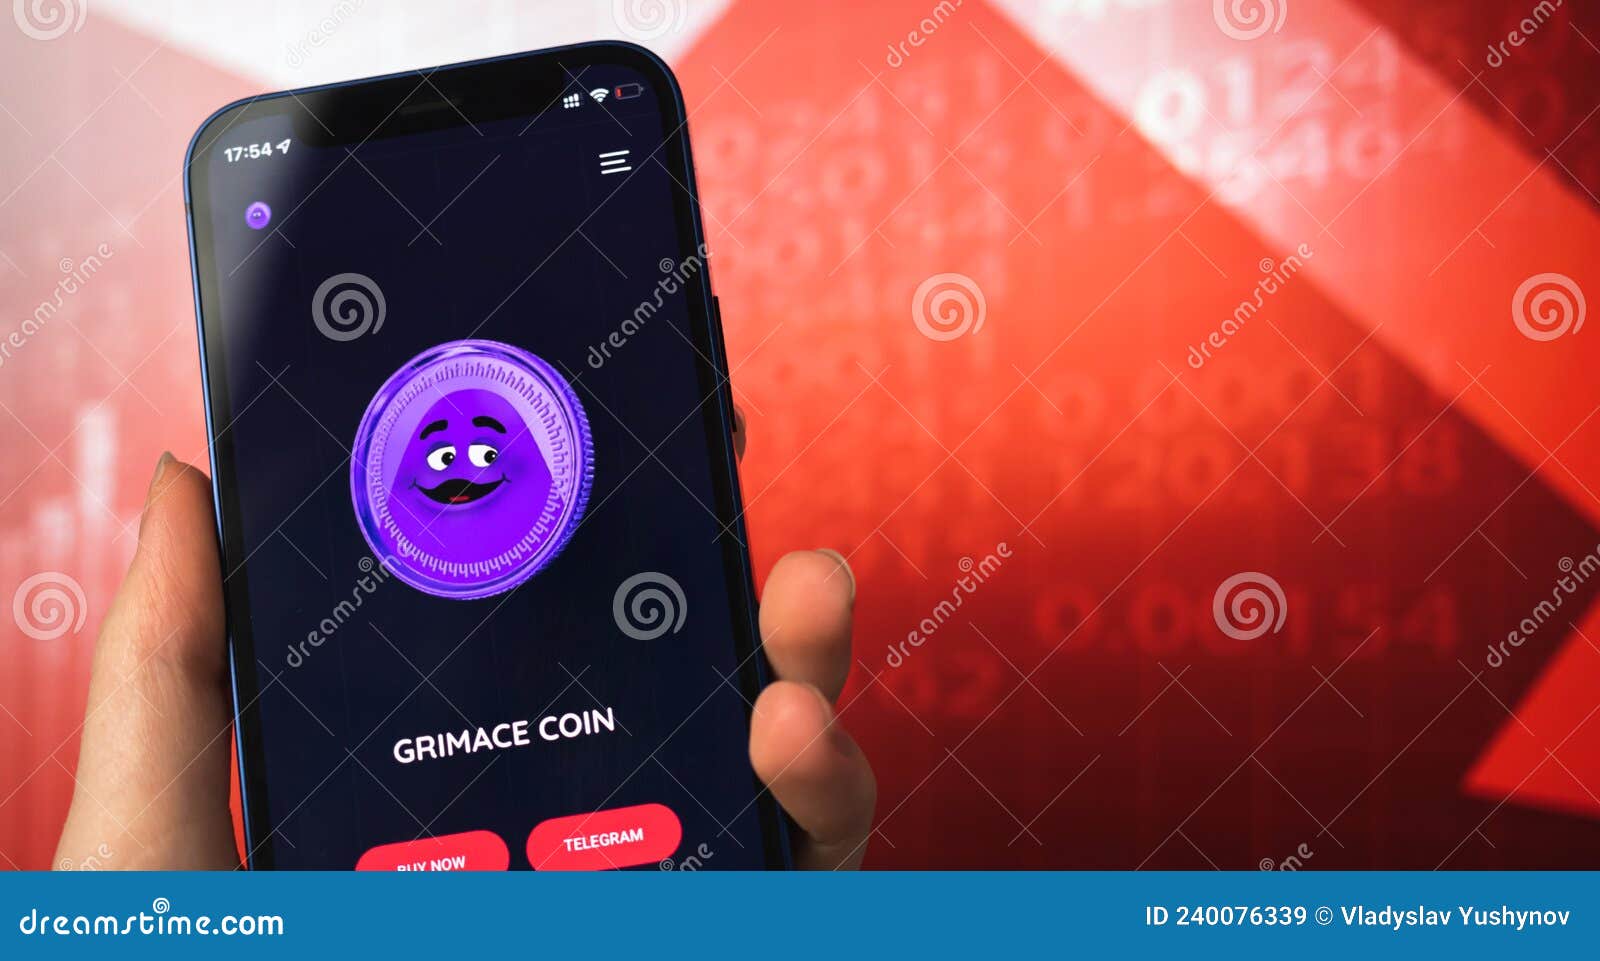 buy grimace coin crypto